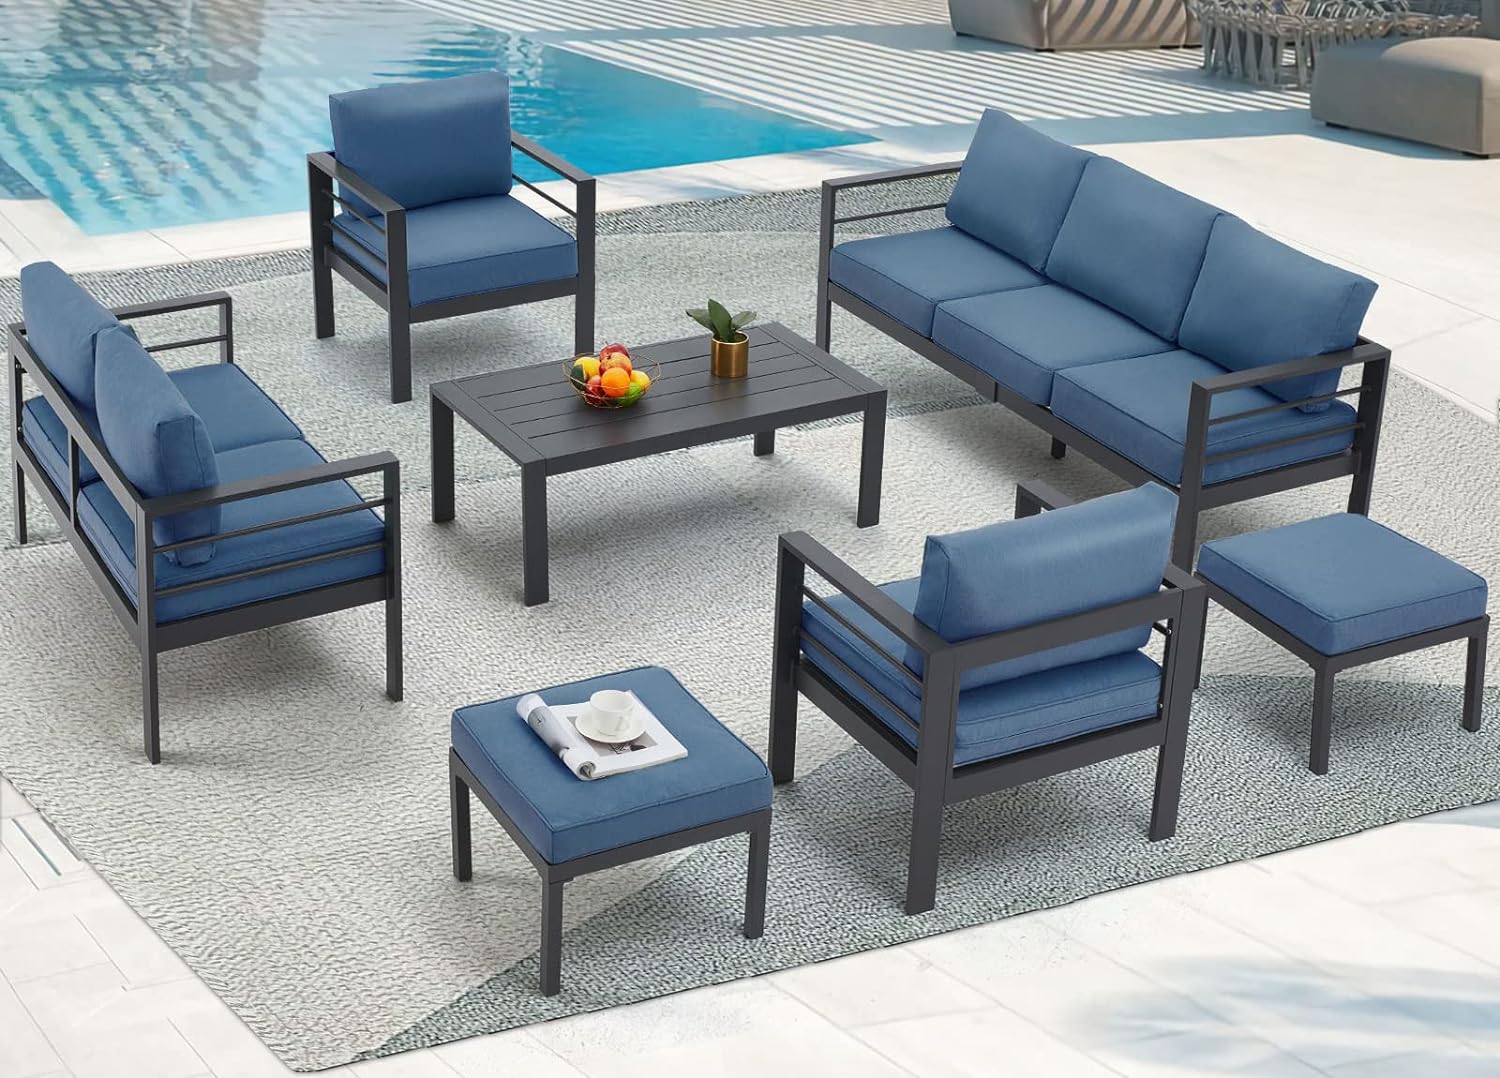 AECOJOY Aluminum Patio Furniture Set, Modern Outdoor Patio Furniture with Coffee Table, 7 Pieces Outdoor Conversation Set with Navy Blue Cushions for Balcony, Porch, Lawn and More